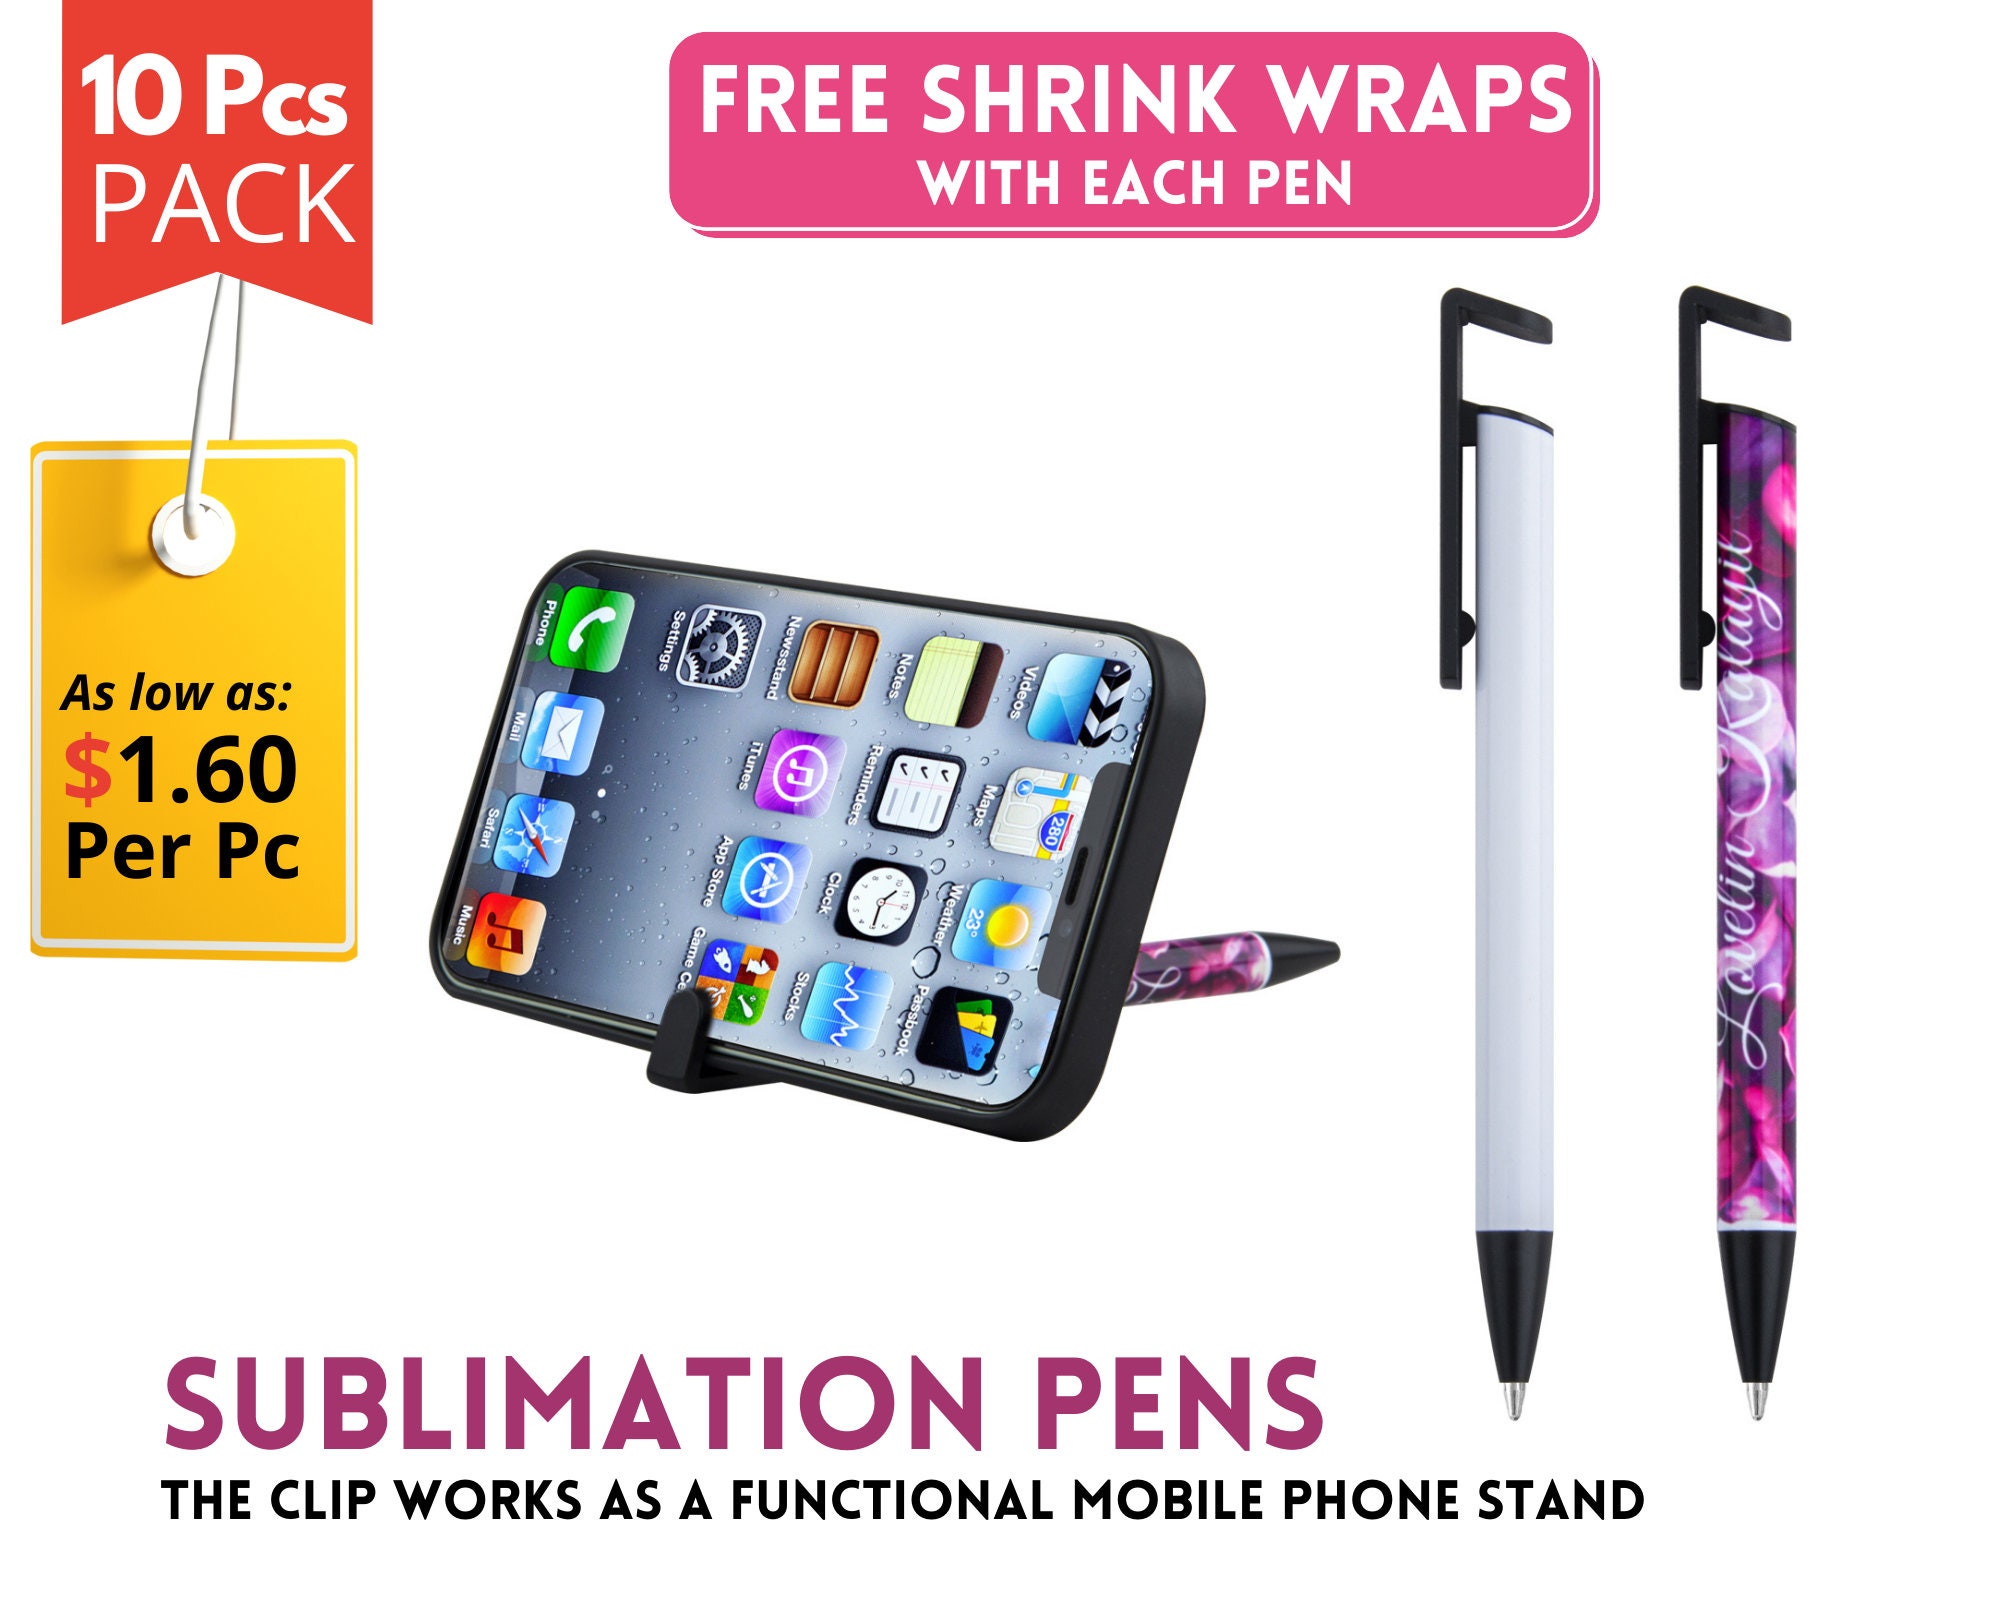 Pack of 10 Sublimation Pen Blanks with Shrink Wrap Coated Aluminum